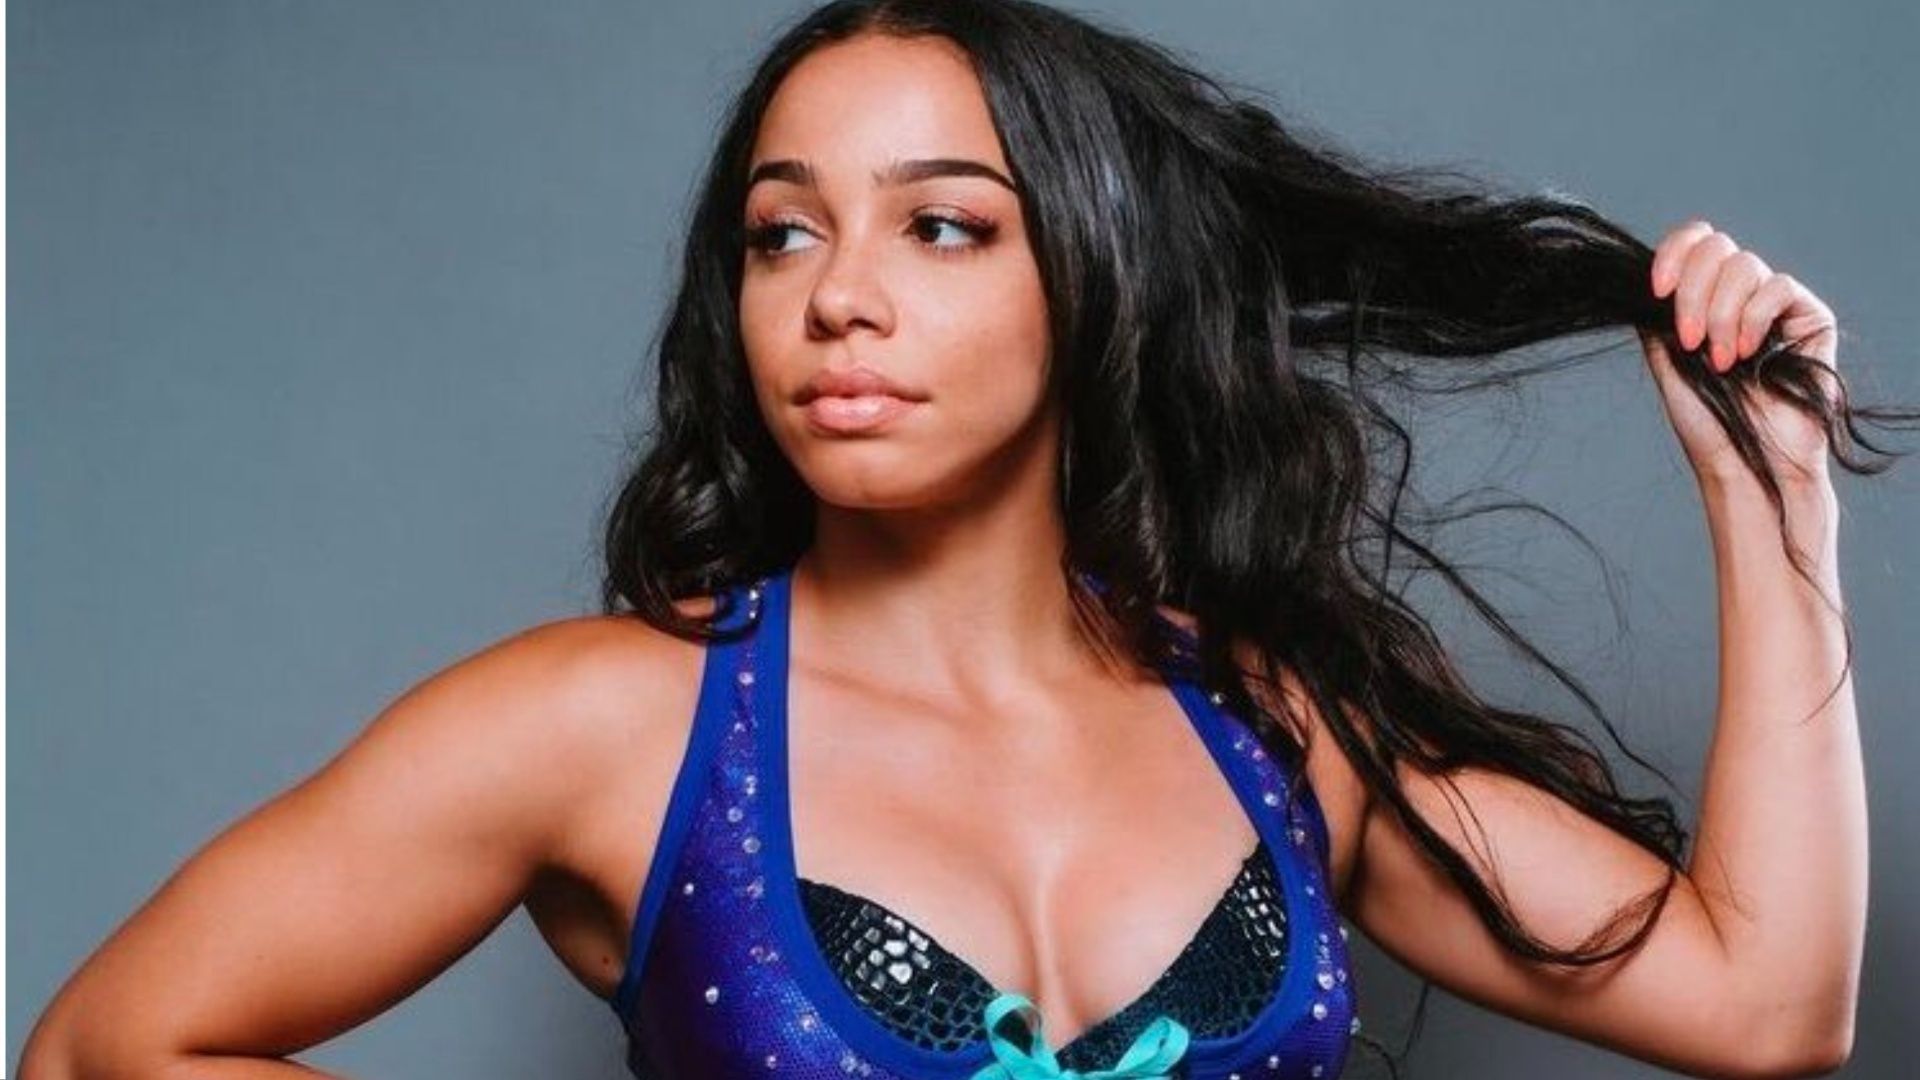 Aleah James recently confirmed her WWE exit.